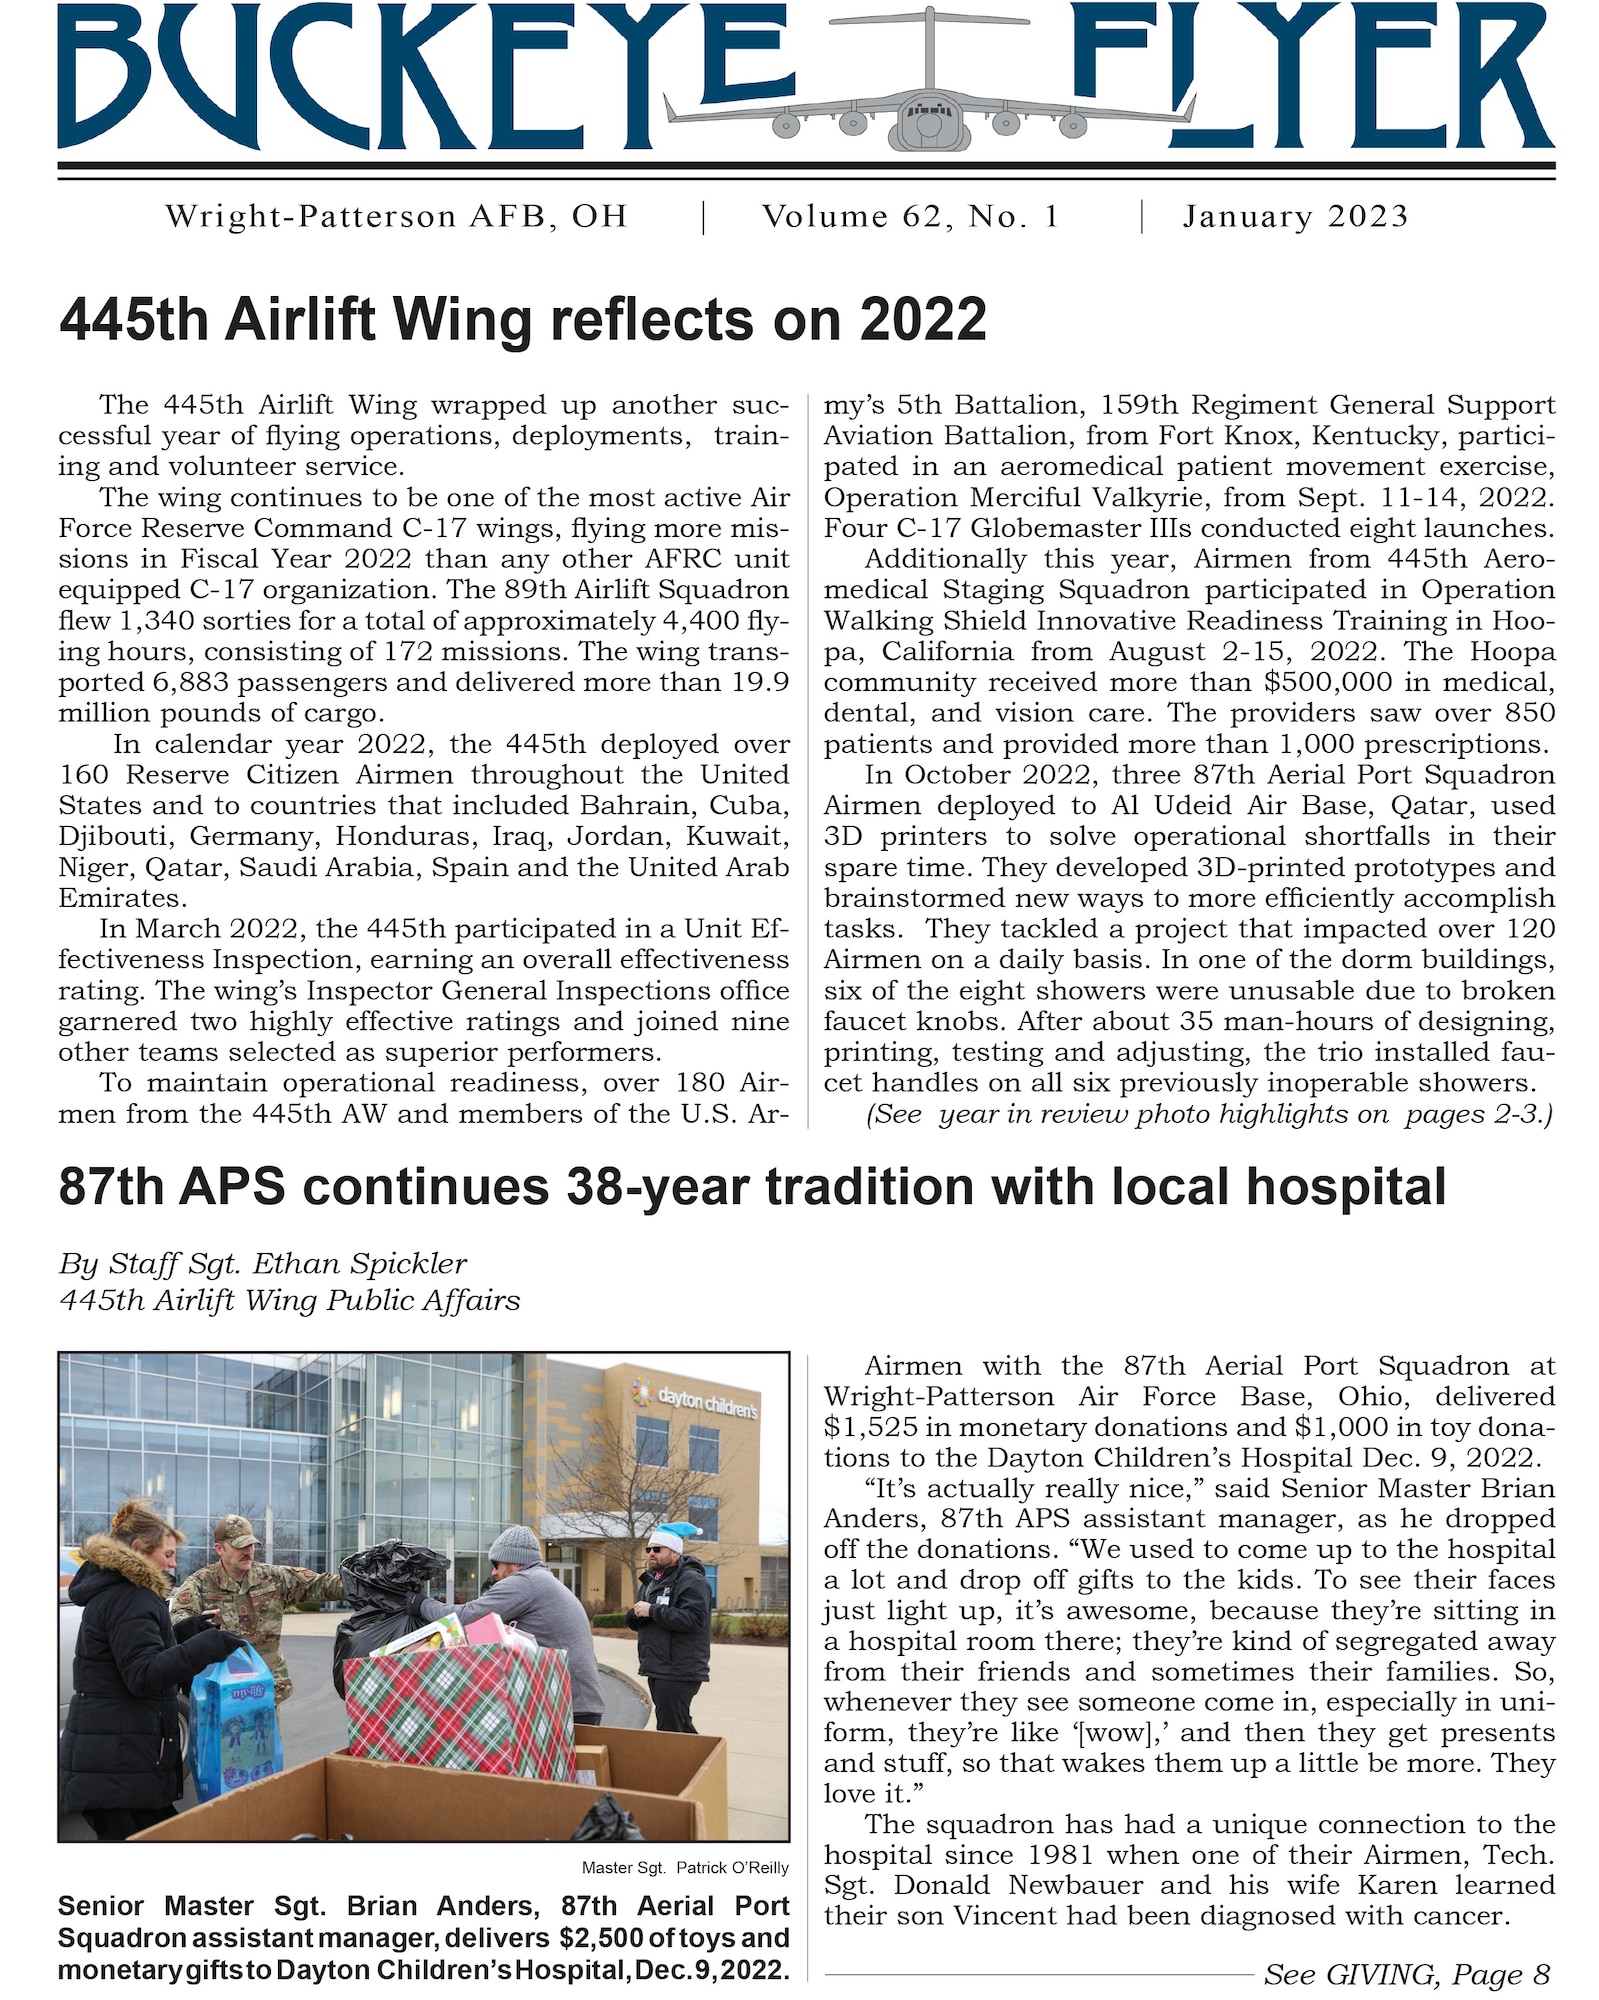 The January 2023 issue of the Buckeye Flyer is now available. The official publication of the 445th Airlift Wing includes eight pages of stories, photos and features pertaining to the 445th Airlift Wing, Air Force Reserve Command and the U.S. Air Force.